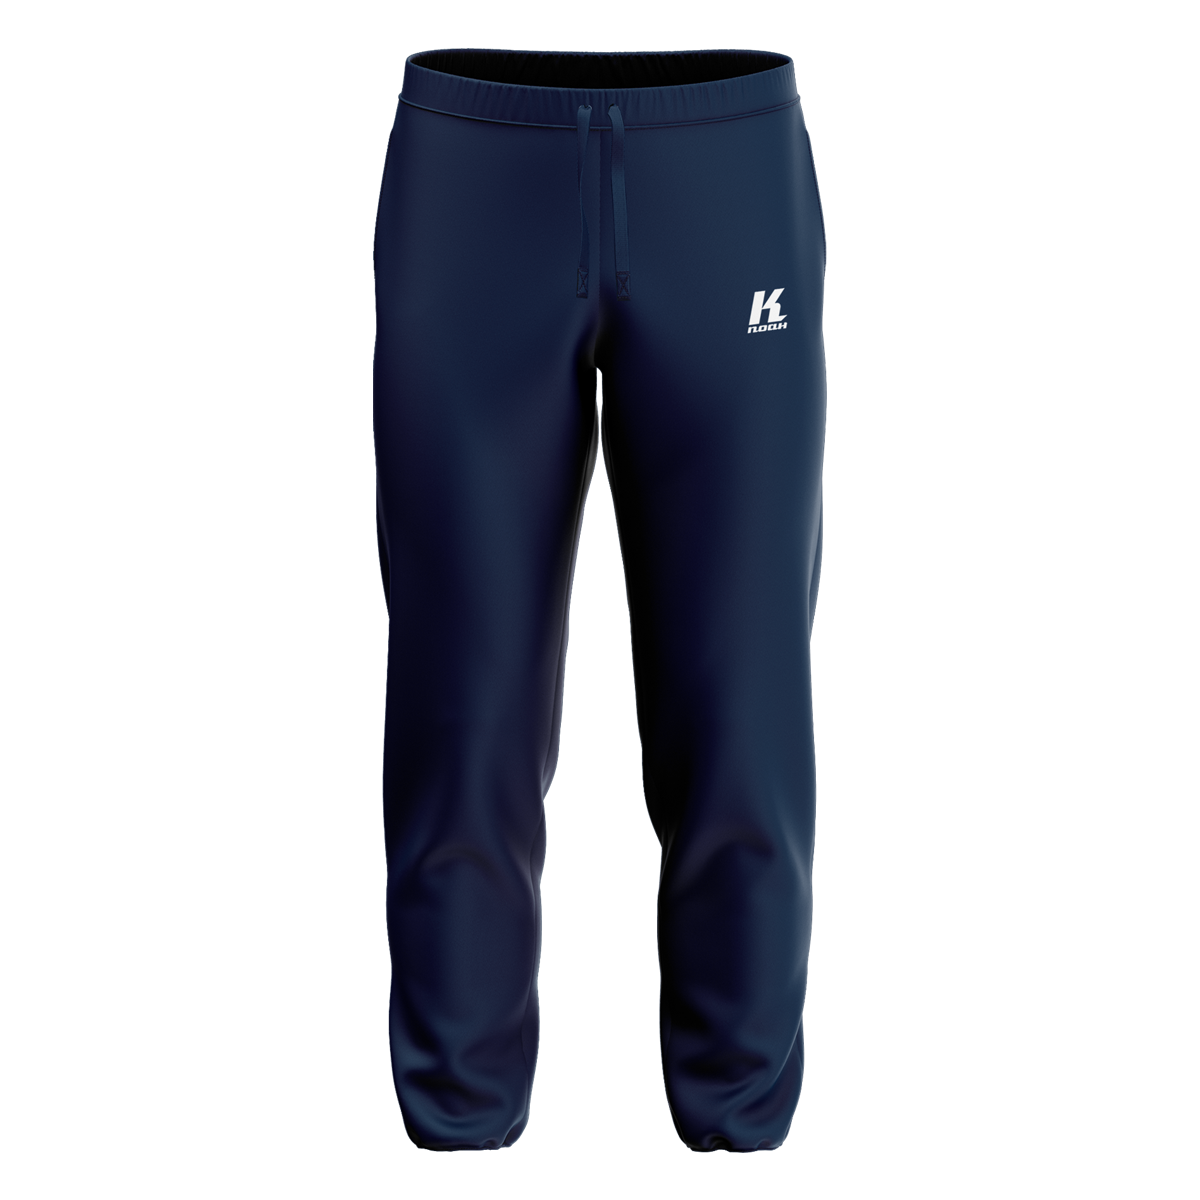 Rams Basic Sweatpant with Cuffs Navy ST793